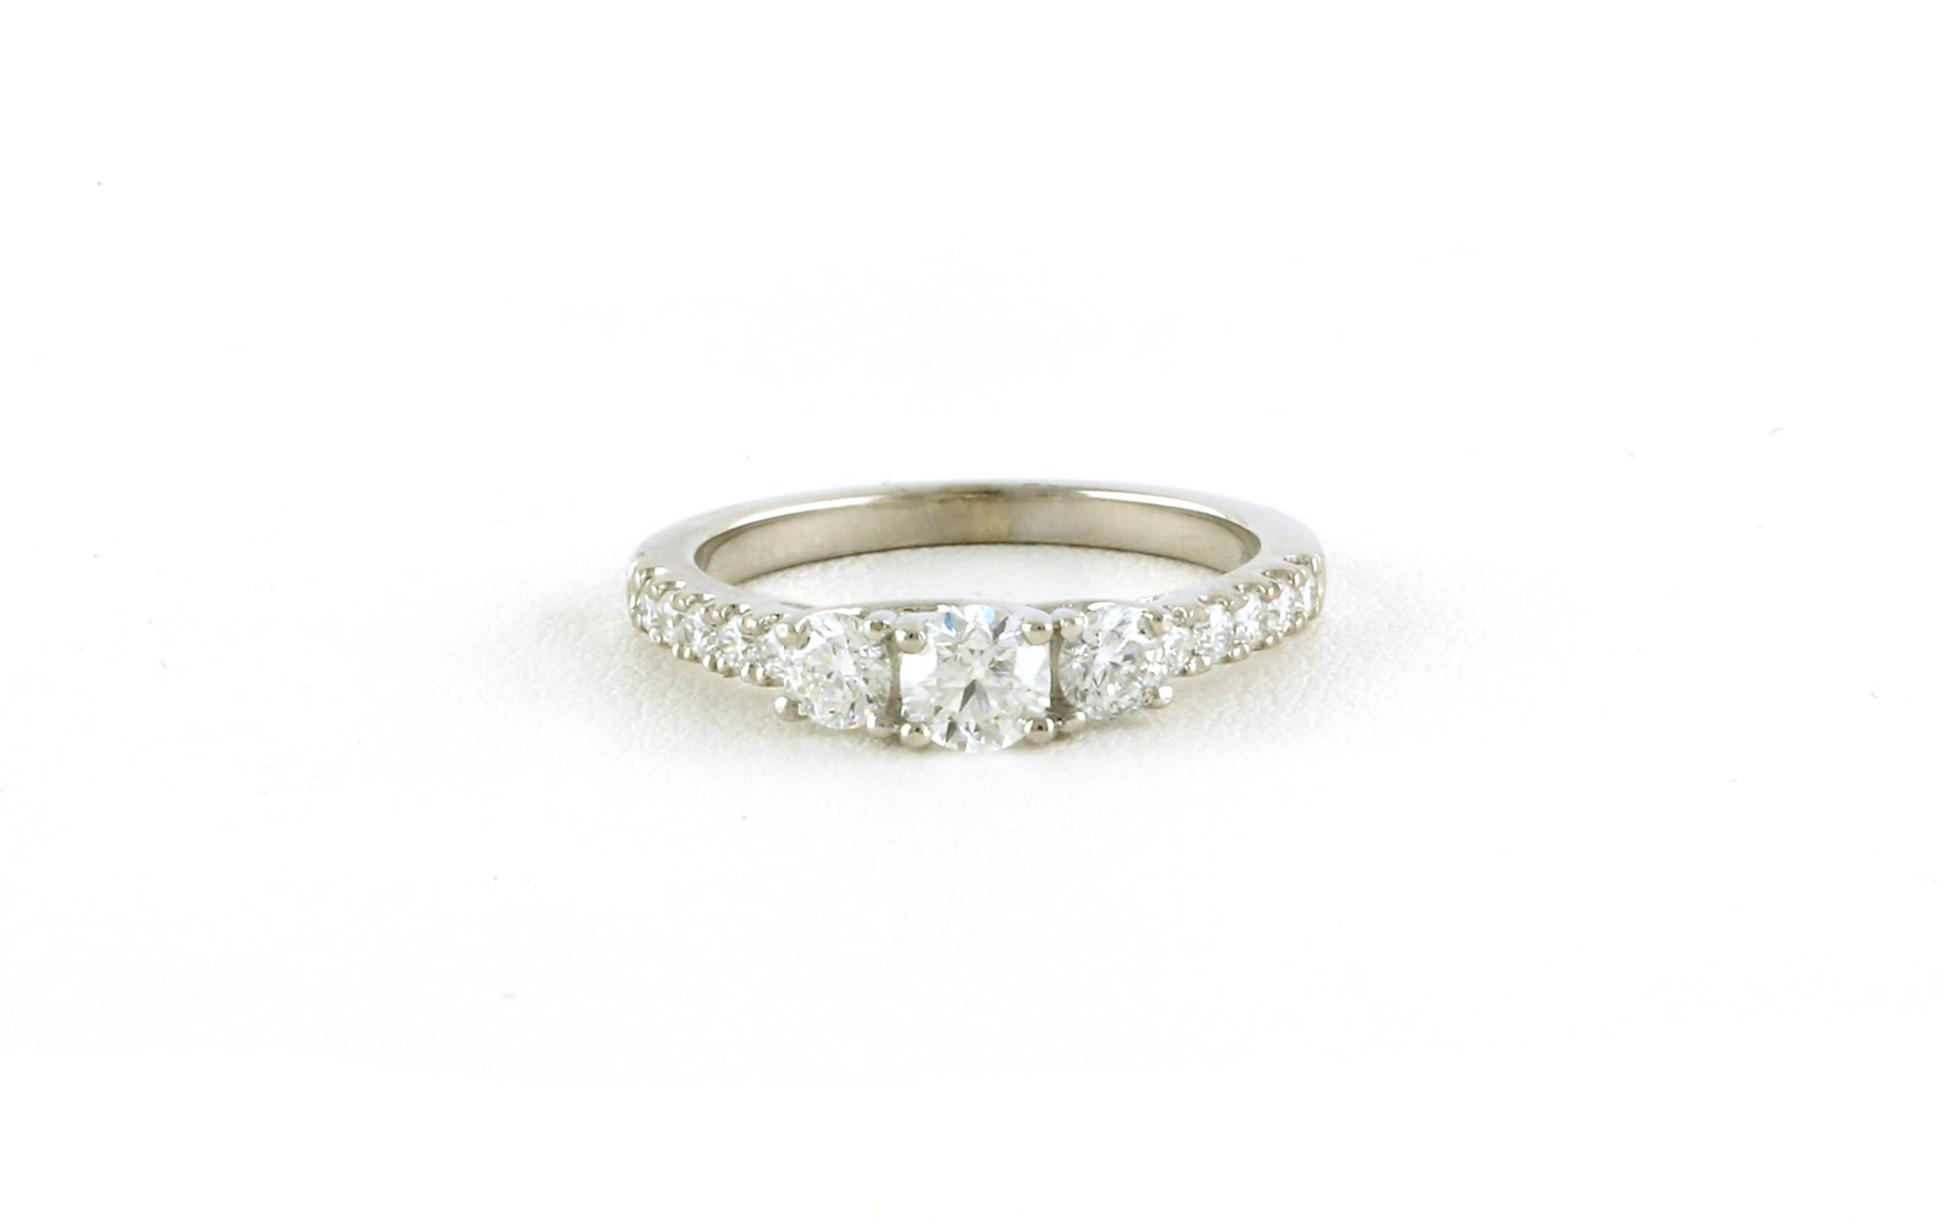 3-Stone Diamond Ring with Pave Shank in White Gold (1.02cts TWT)